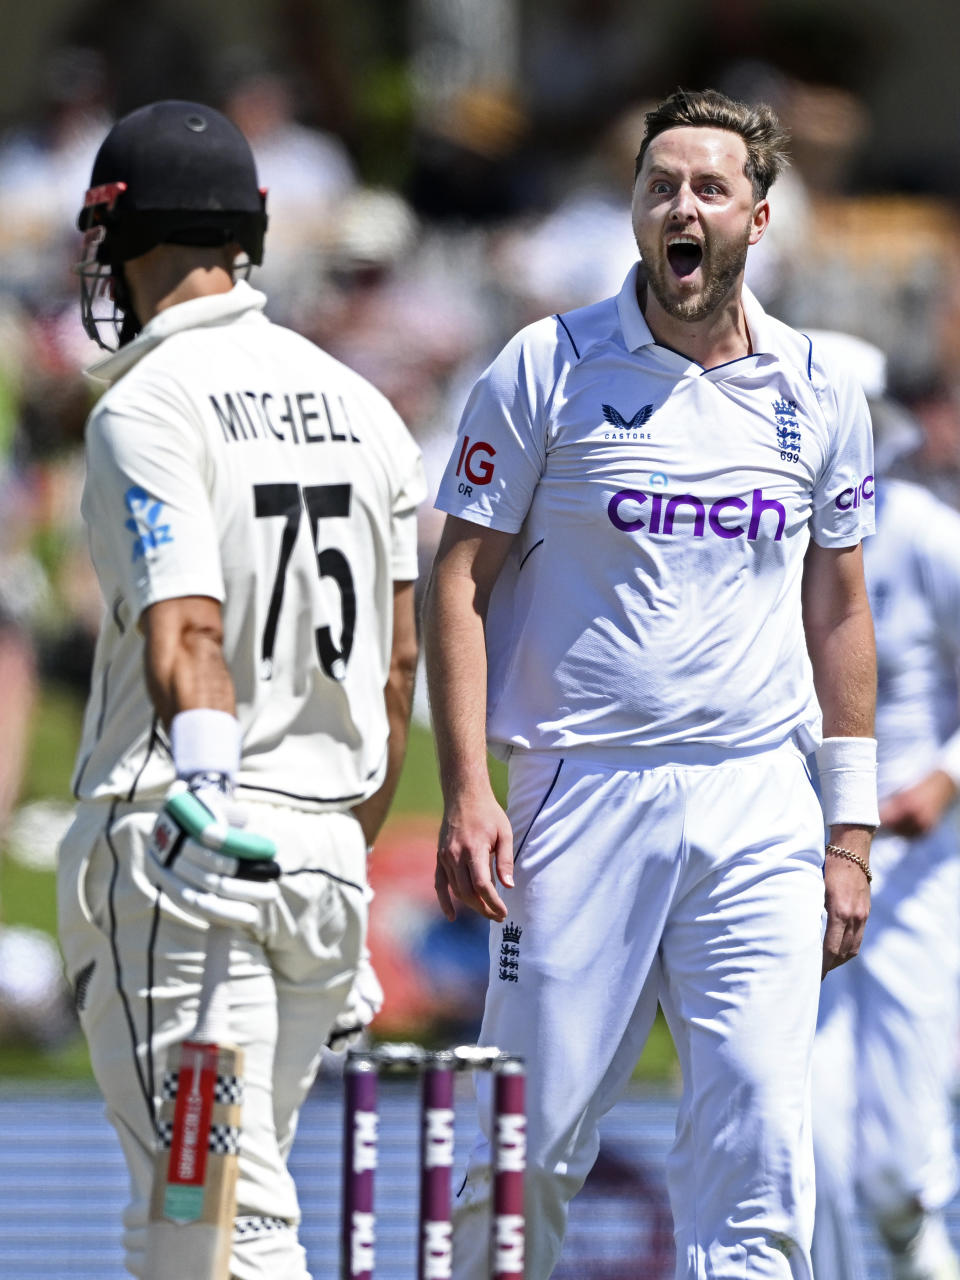 England's Ollie Robinson, right, celebrates taking the wicket of New Zealand's Daryl Mitchell on the second day of their cricket test match in Tauranga, New Zealand, Friday, Feb. 17, 2023. (Andrew Cornaga/Photosport via AP)